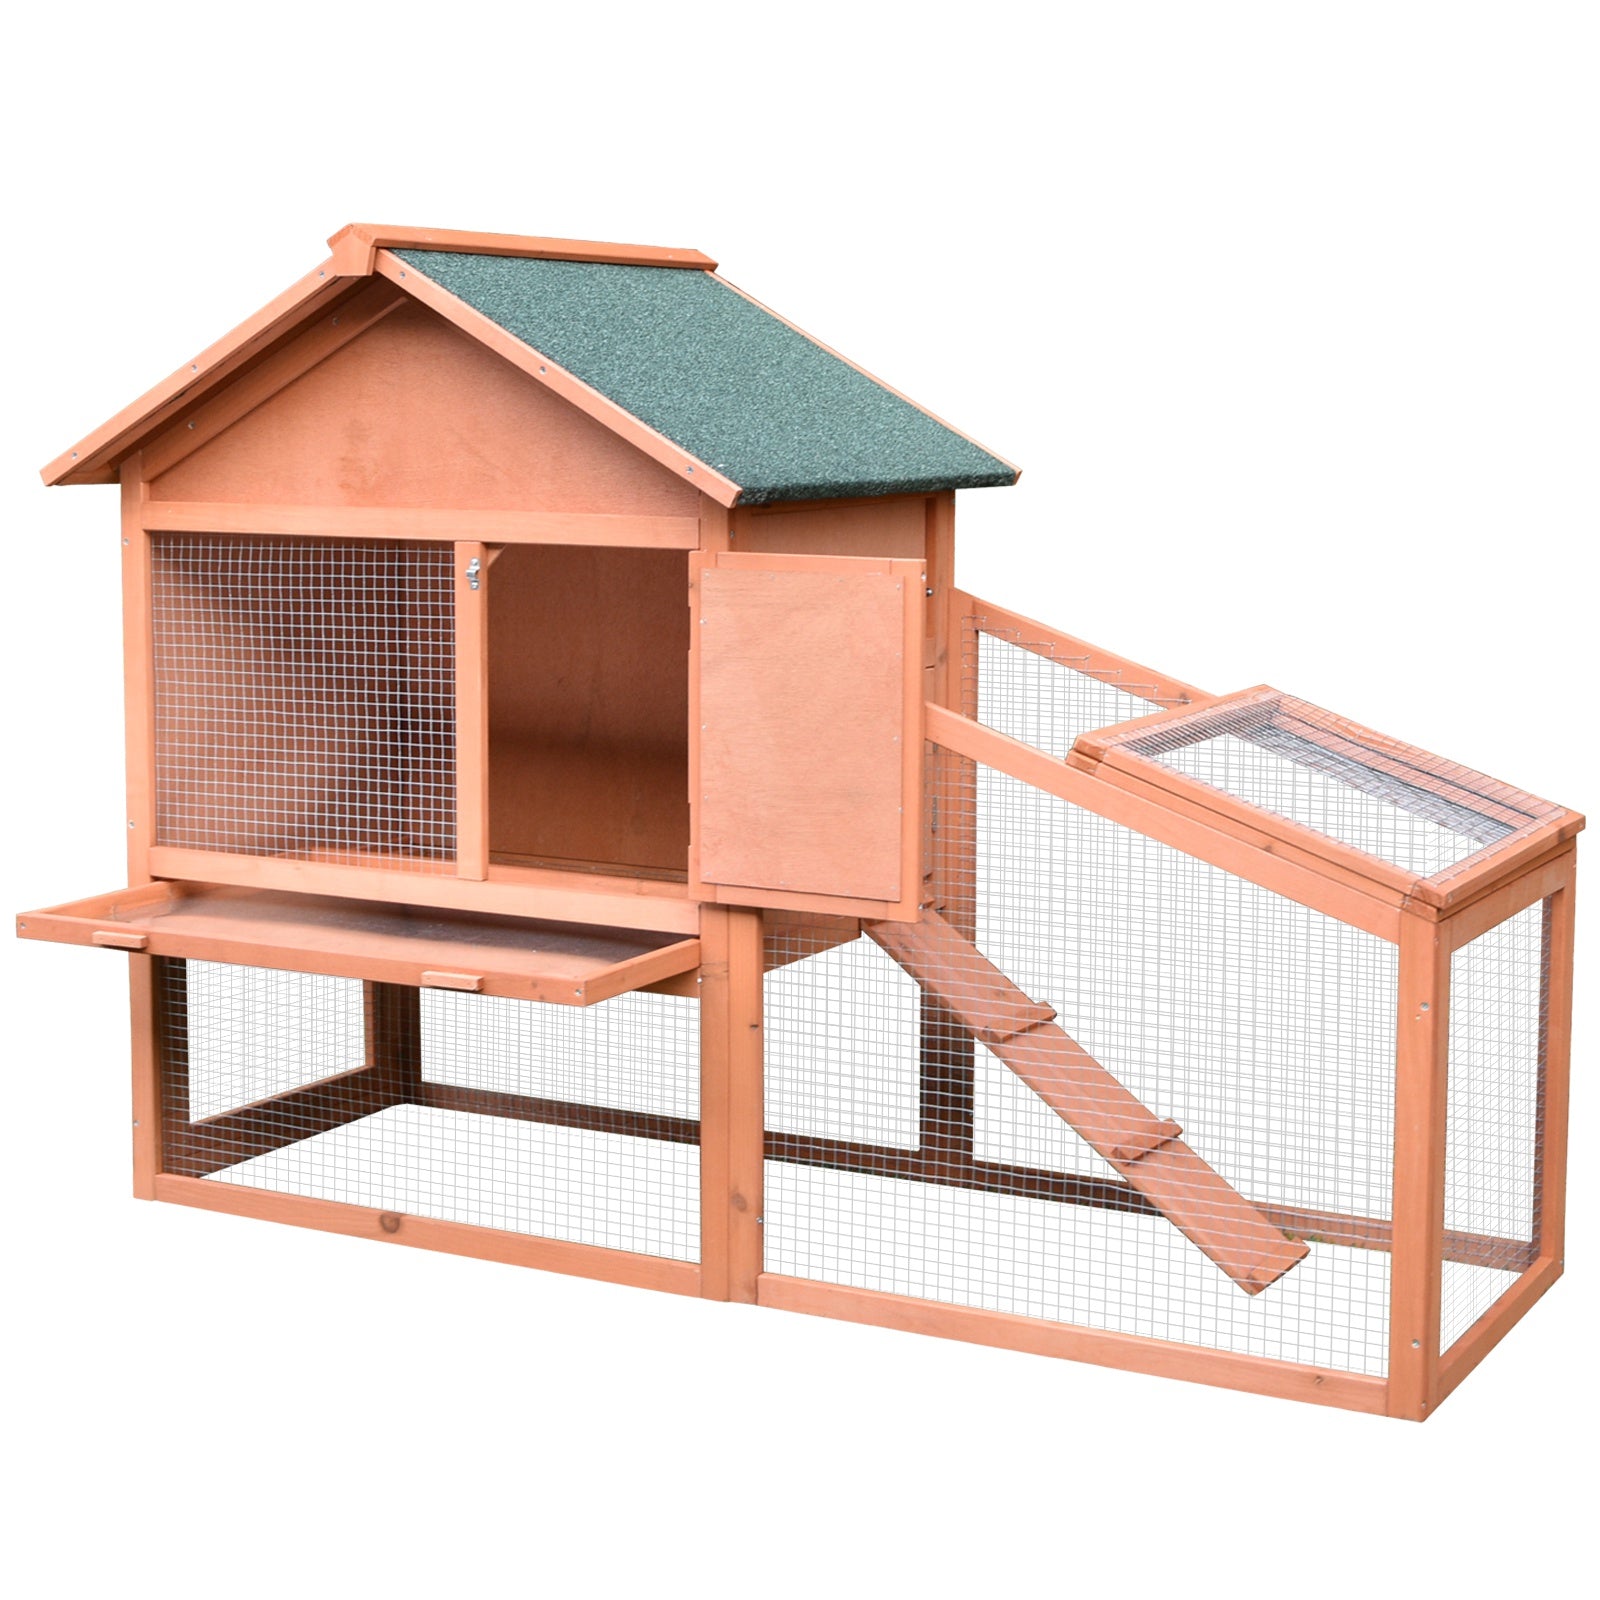 2 Tier Rabbit Cage, Solid Wood Bunny House, Water Resistant Asphalt Roof Ramp Sliding tray 144 x 64.5 x 100 cm Red/Brown, PawHut,